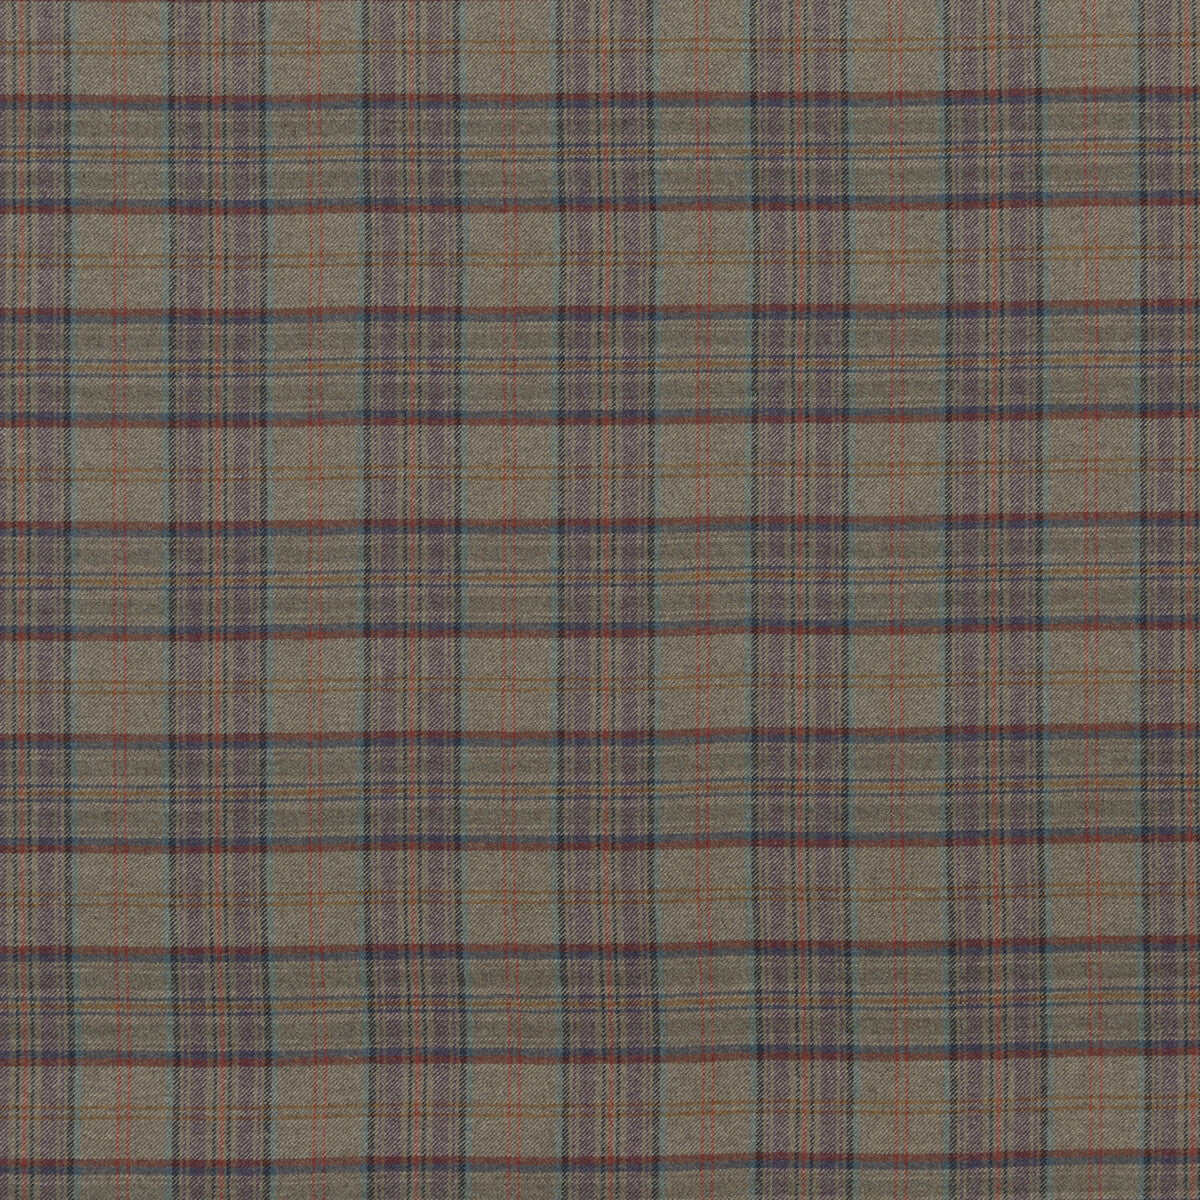 Victoria Plaid fabric in royal blue color - pattern BF10655.2.0 - by G P &amp; J Baker in the Historic Royal Palaces collection